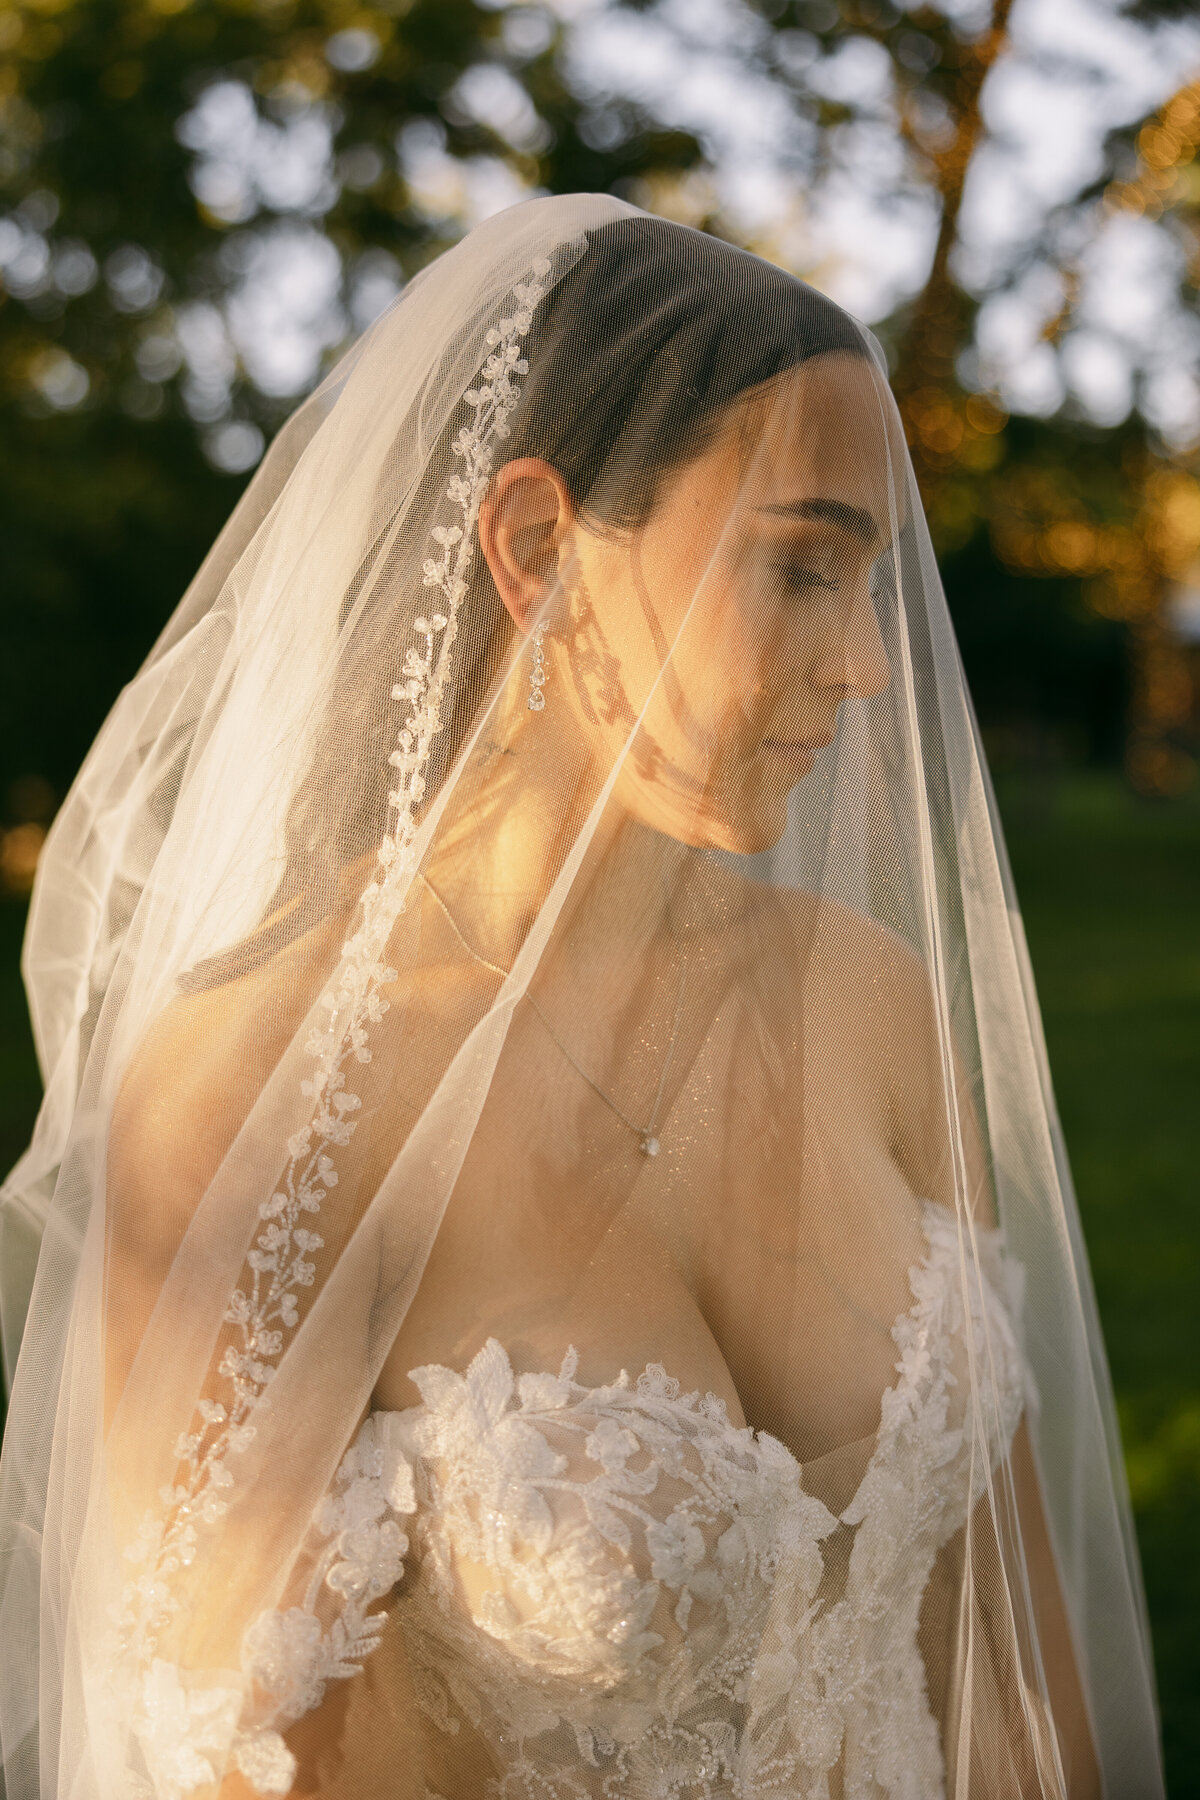 A bride looking to the side with a veil covering her face